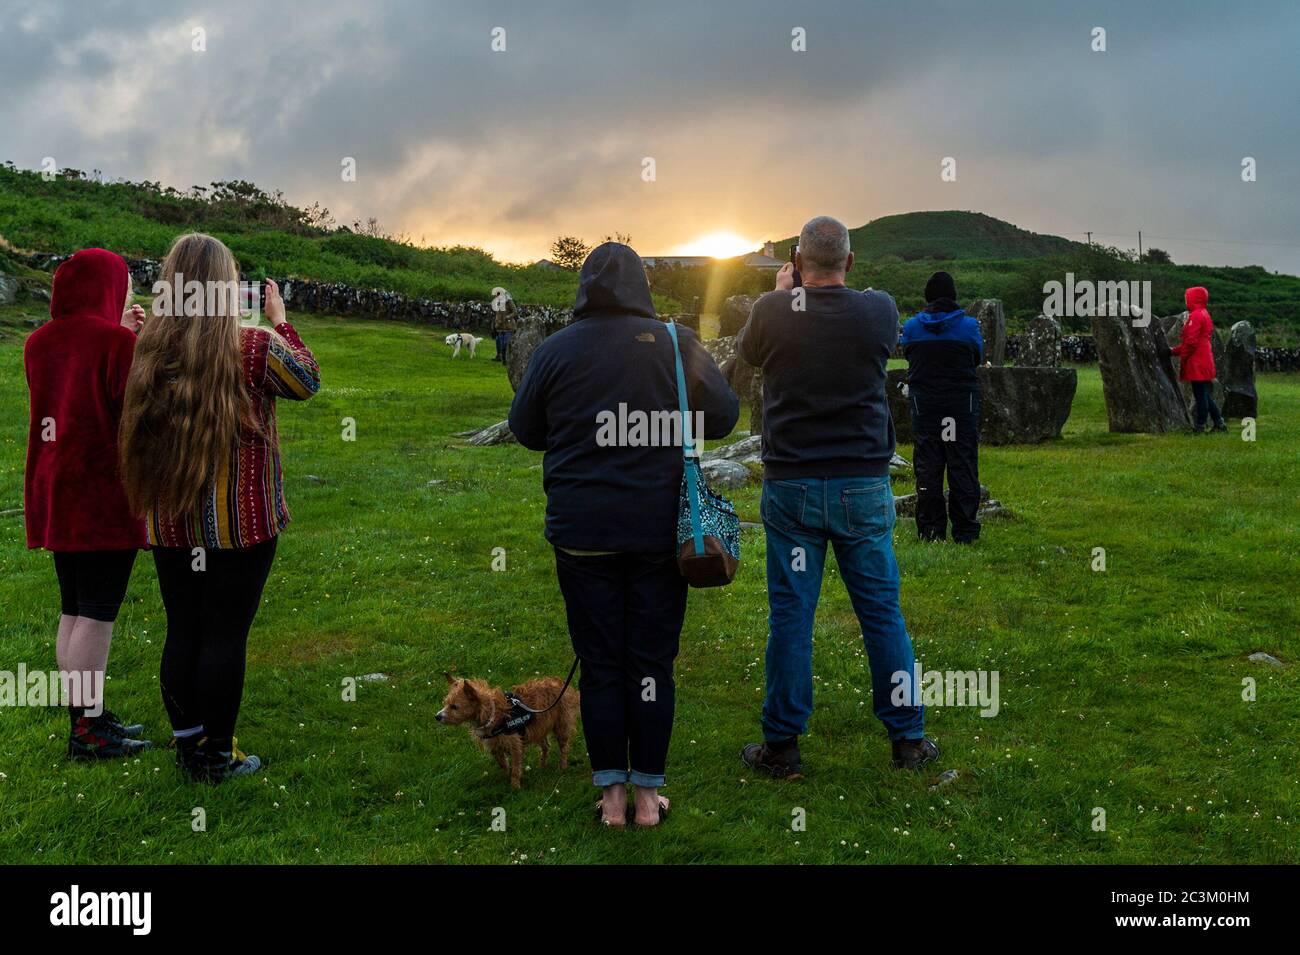 Glandore, West Cork, Ireland. 21st June, 2020. The sun rises over the Drombeg Stone Circle marking the start of the summer solstice, the longest day of the year. The Drombeg Stone Circle, also known as The Druid's Altar, is a Megalithic stone circle. Credit: AG News/Alamy Live News Stock Photo